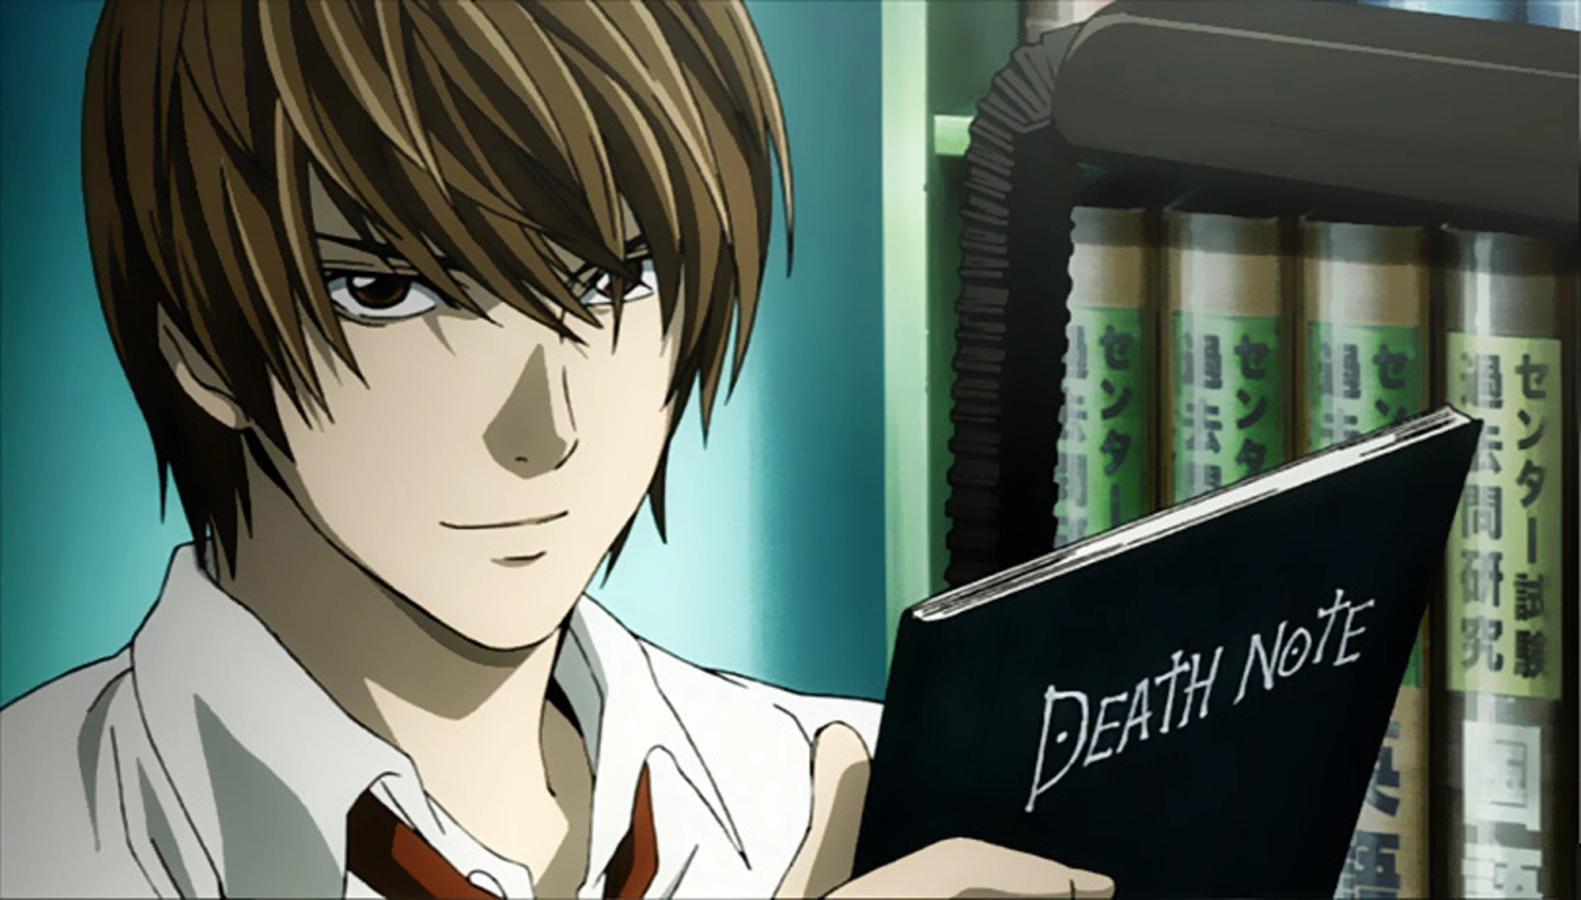 Light from Death Note Ending Explained